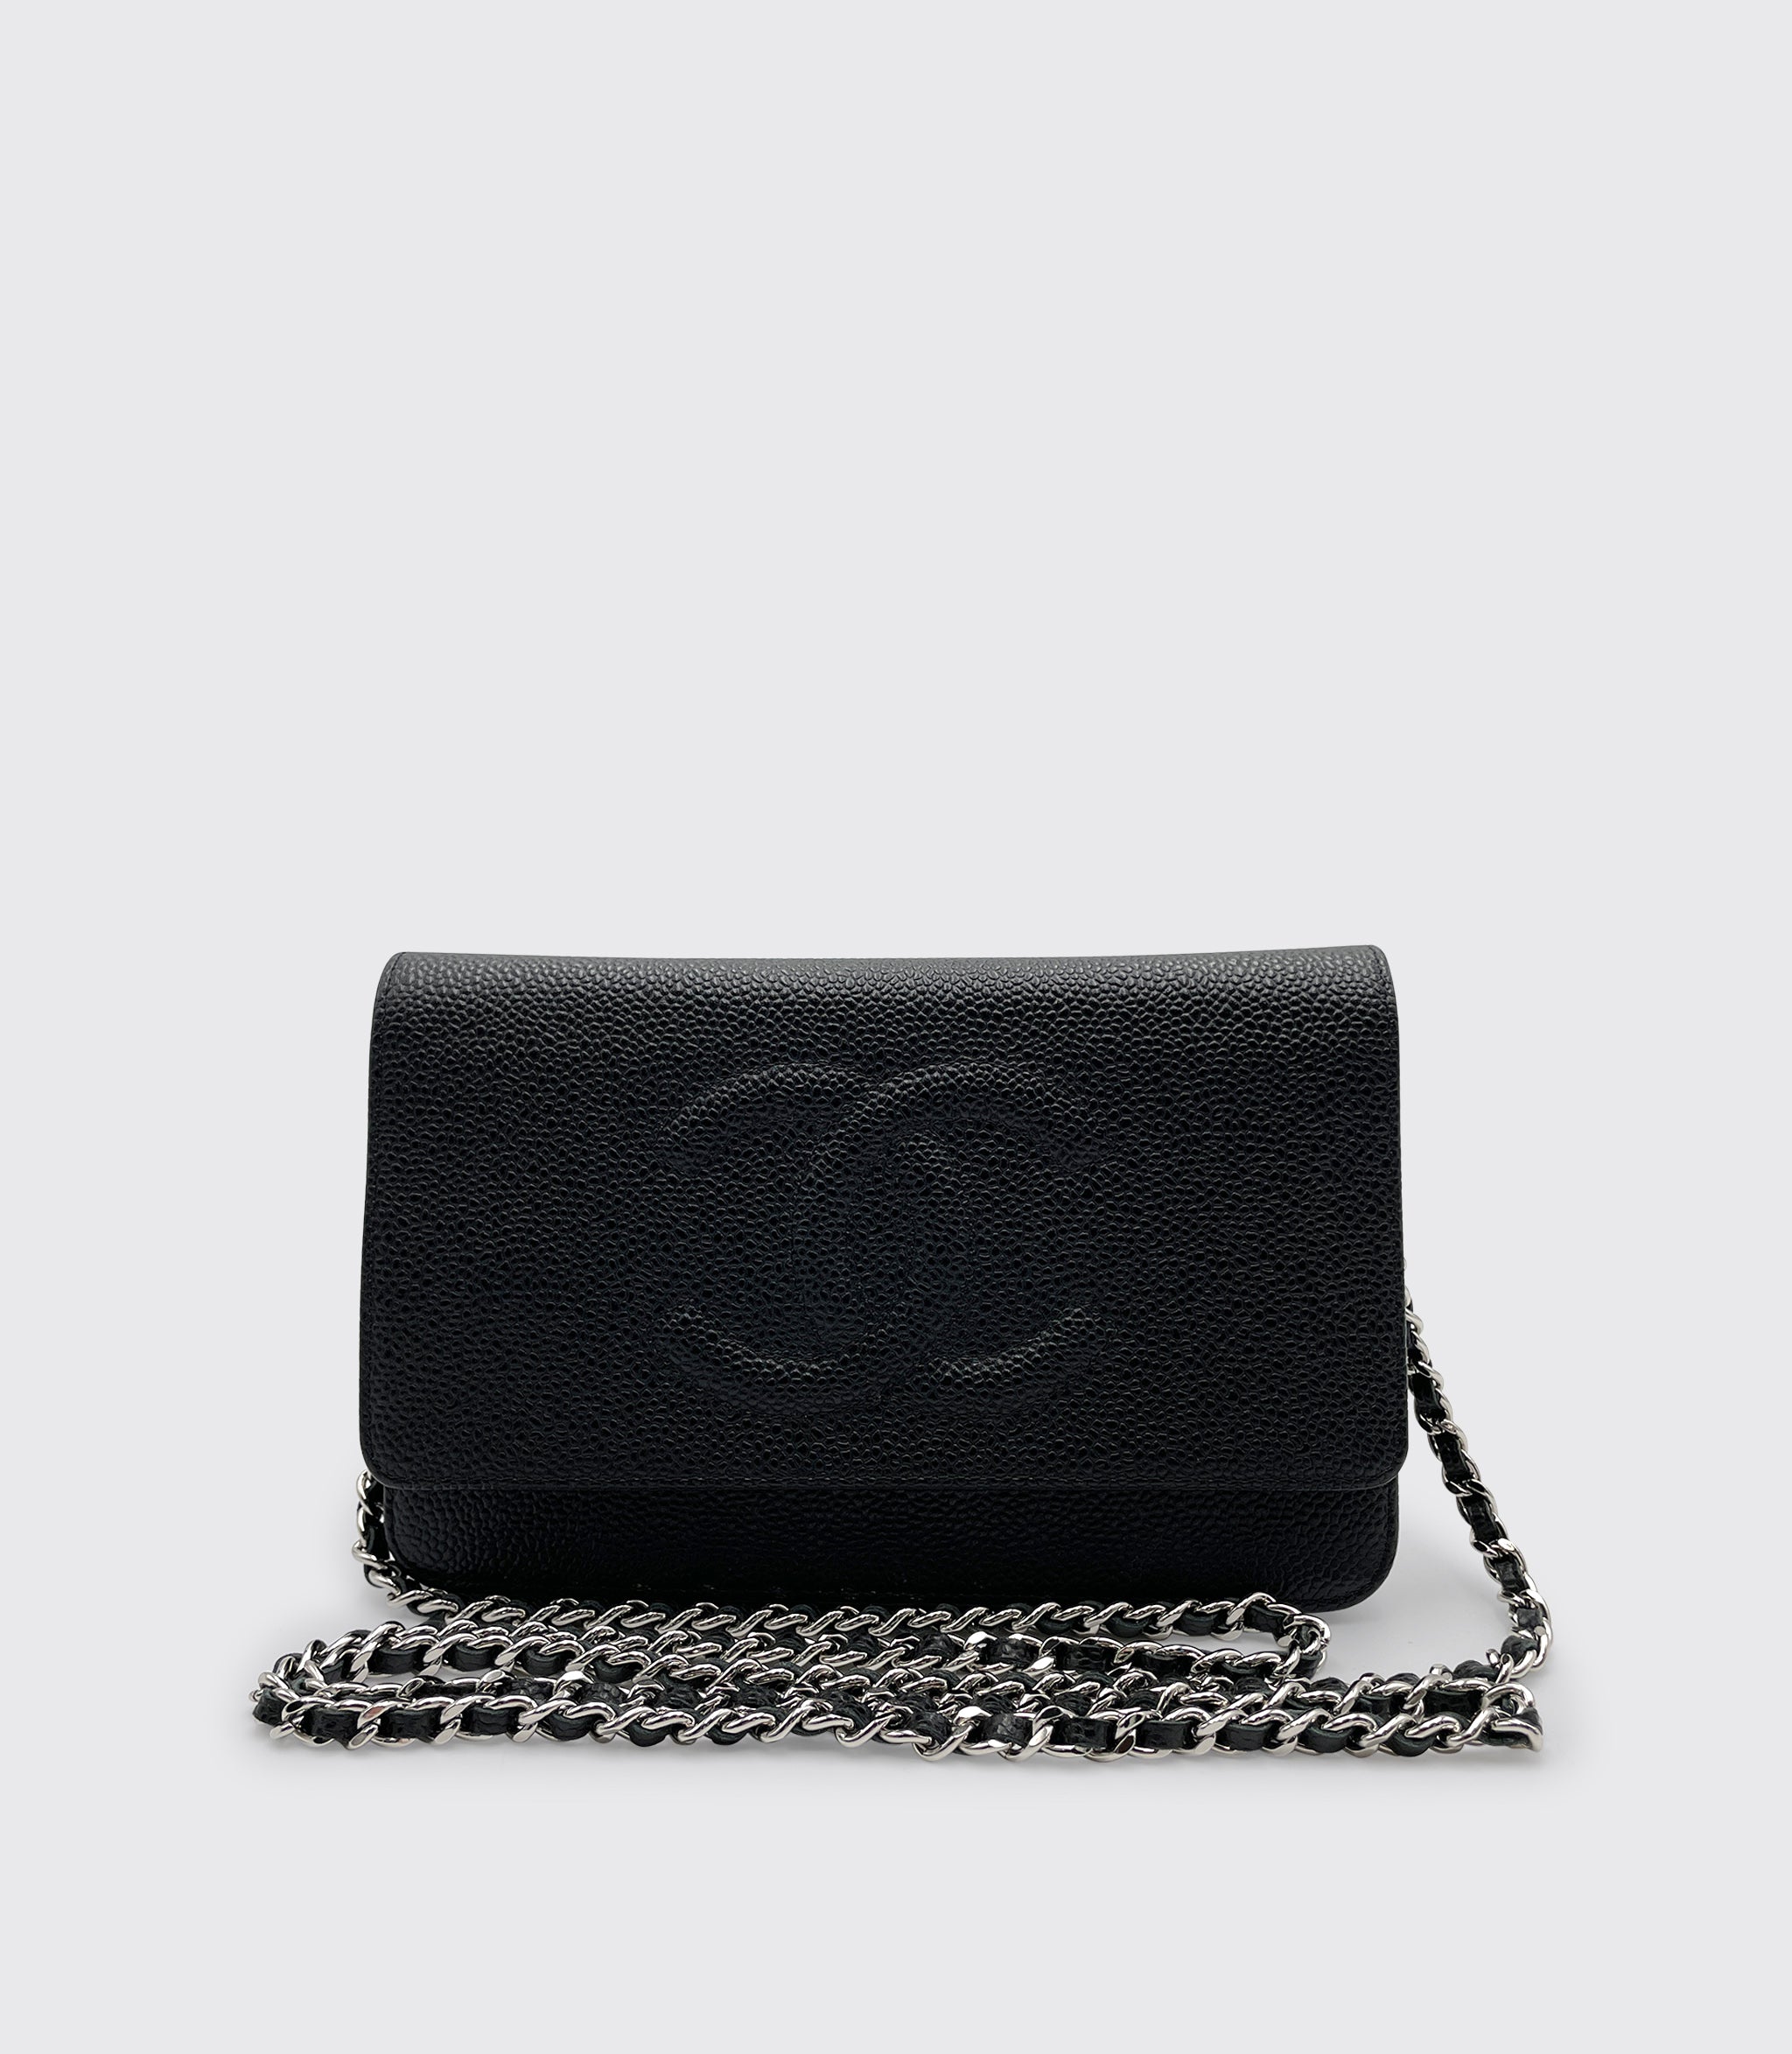 CHANEL - CC Strass Champagne Patent Leather - WOC Wallet on Chain